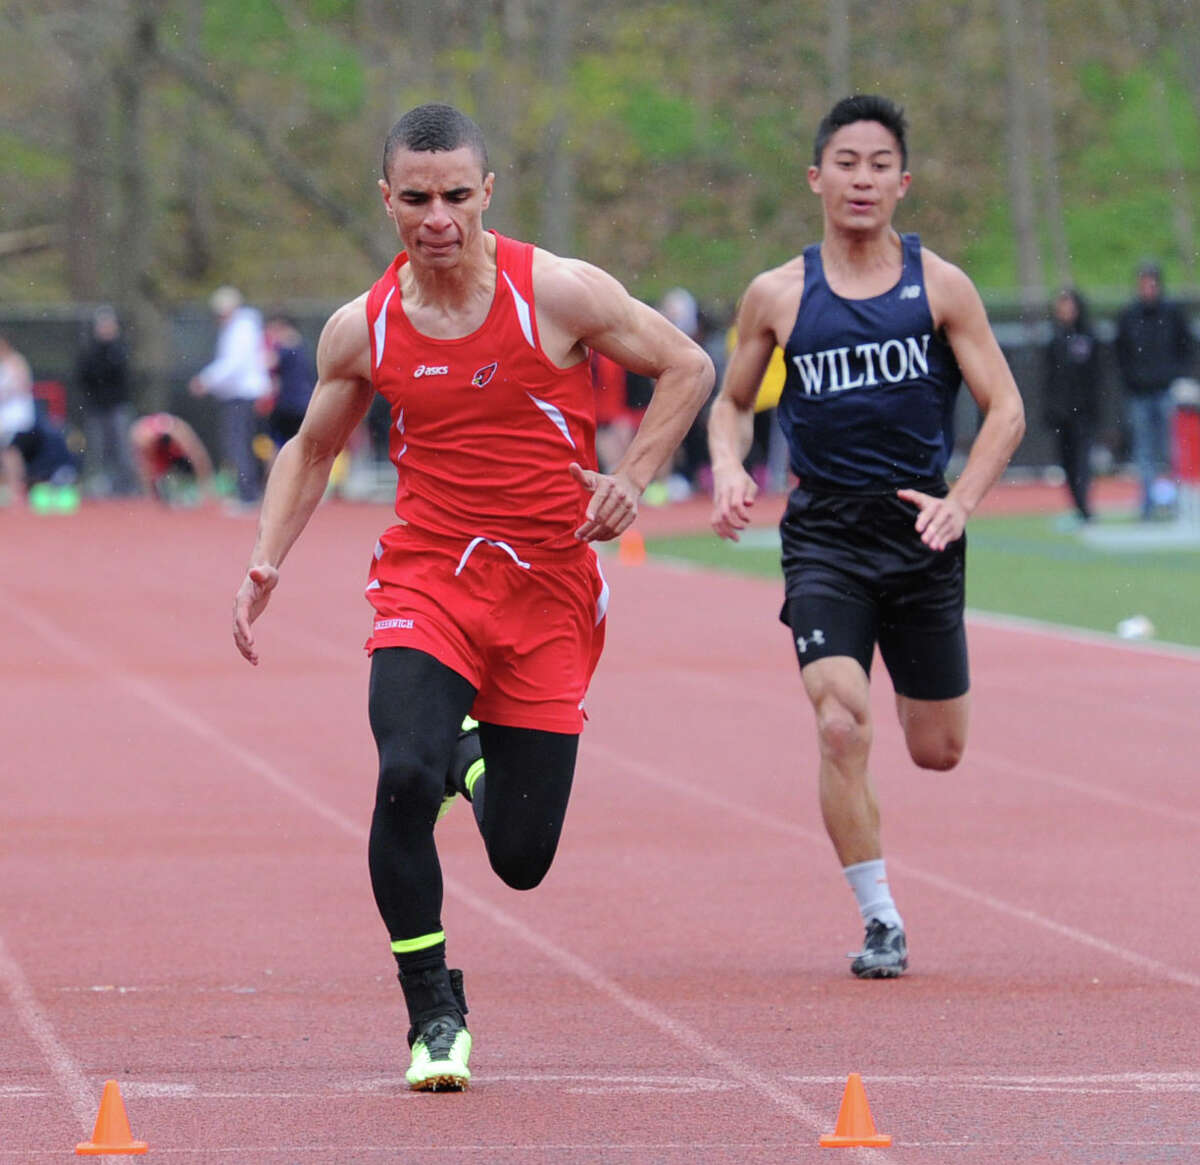 At left, Austin Longi of Greenwich High takes first place in the 100 meter dash beating out Wilton's Marco Agudo, right, during the high school track meet at Greenwich High School, Tuesday, April 29, 2014.